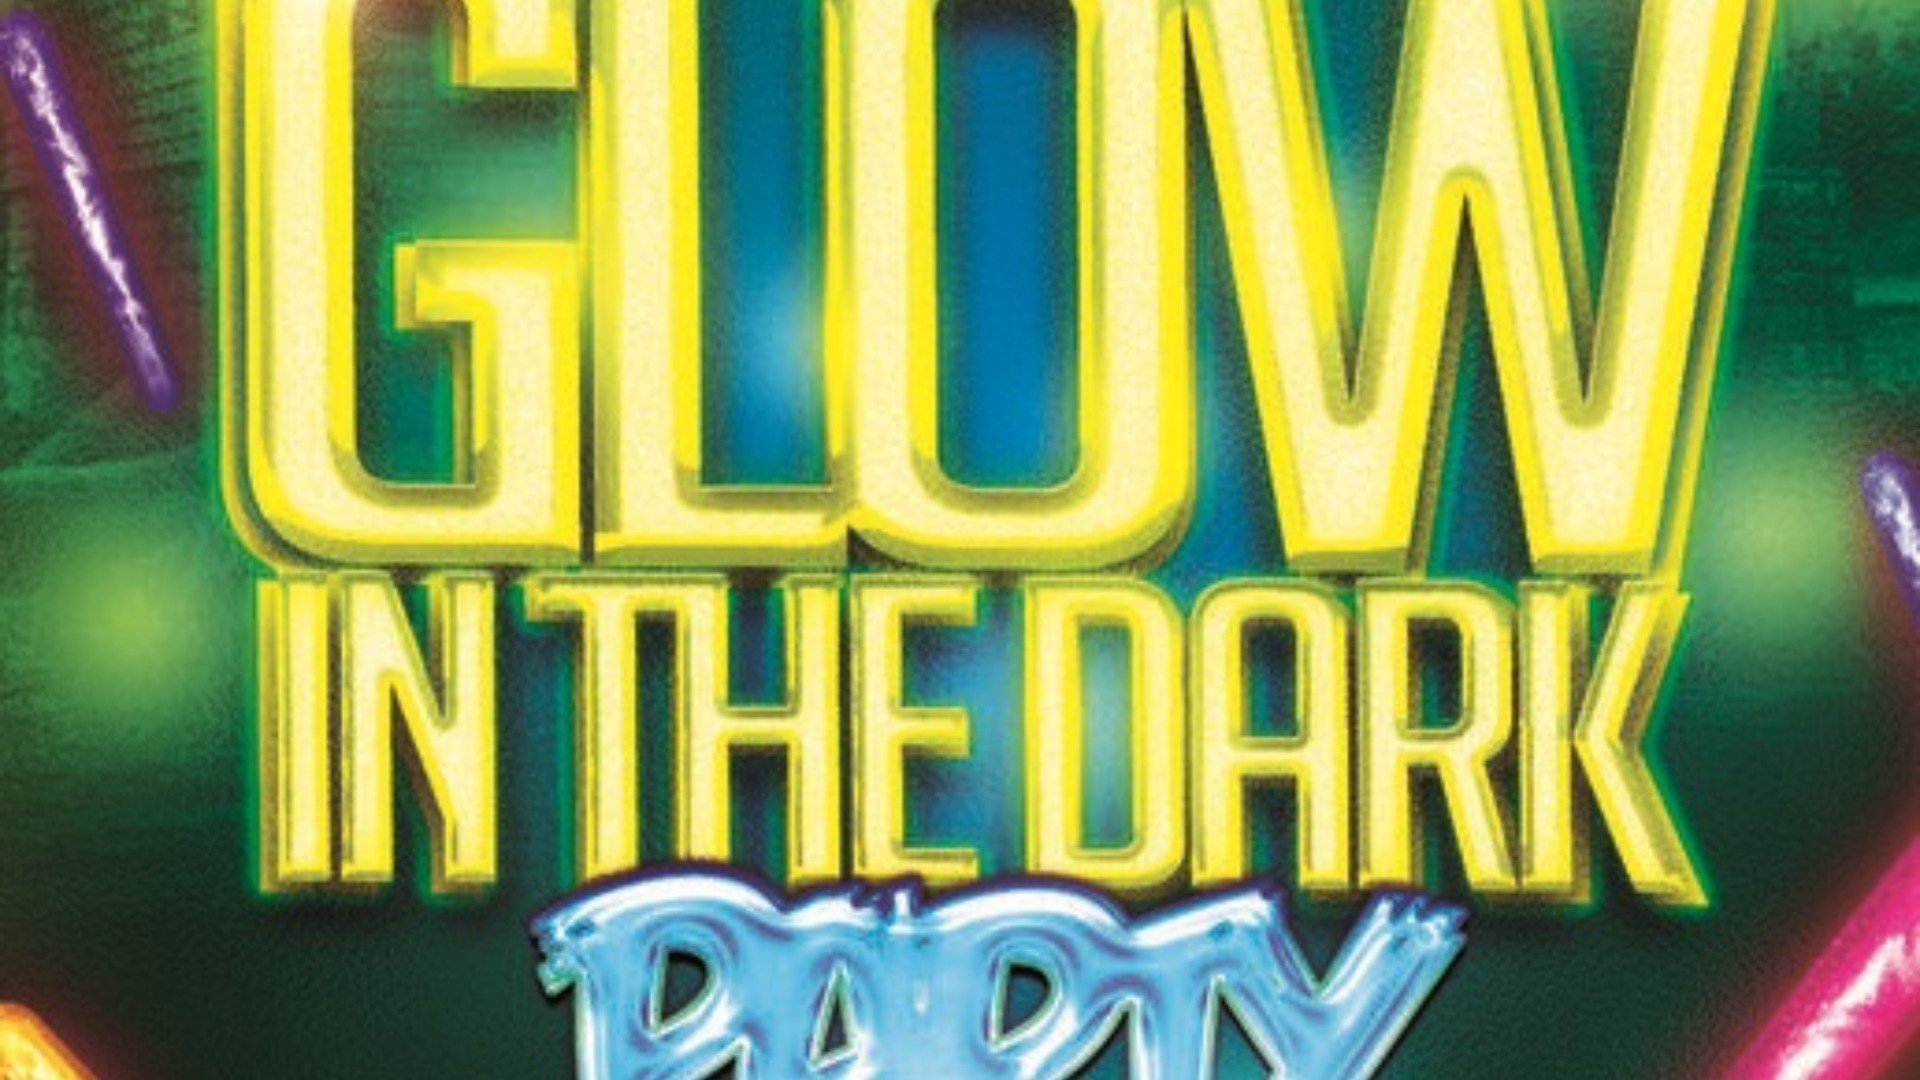 GLOW IN THE DARK PARTY @ FICTION NIGHTCLUB | FRIDAY MARCH 31ST